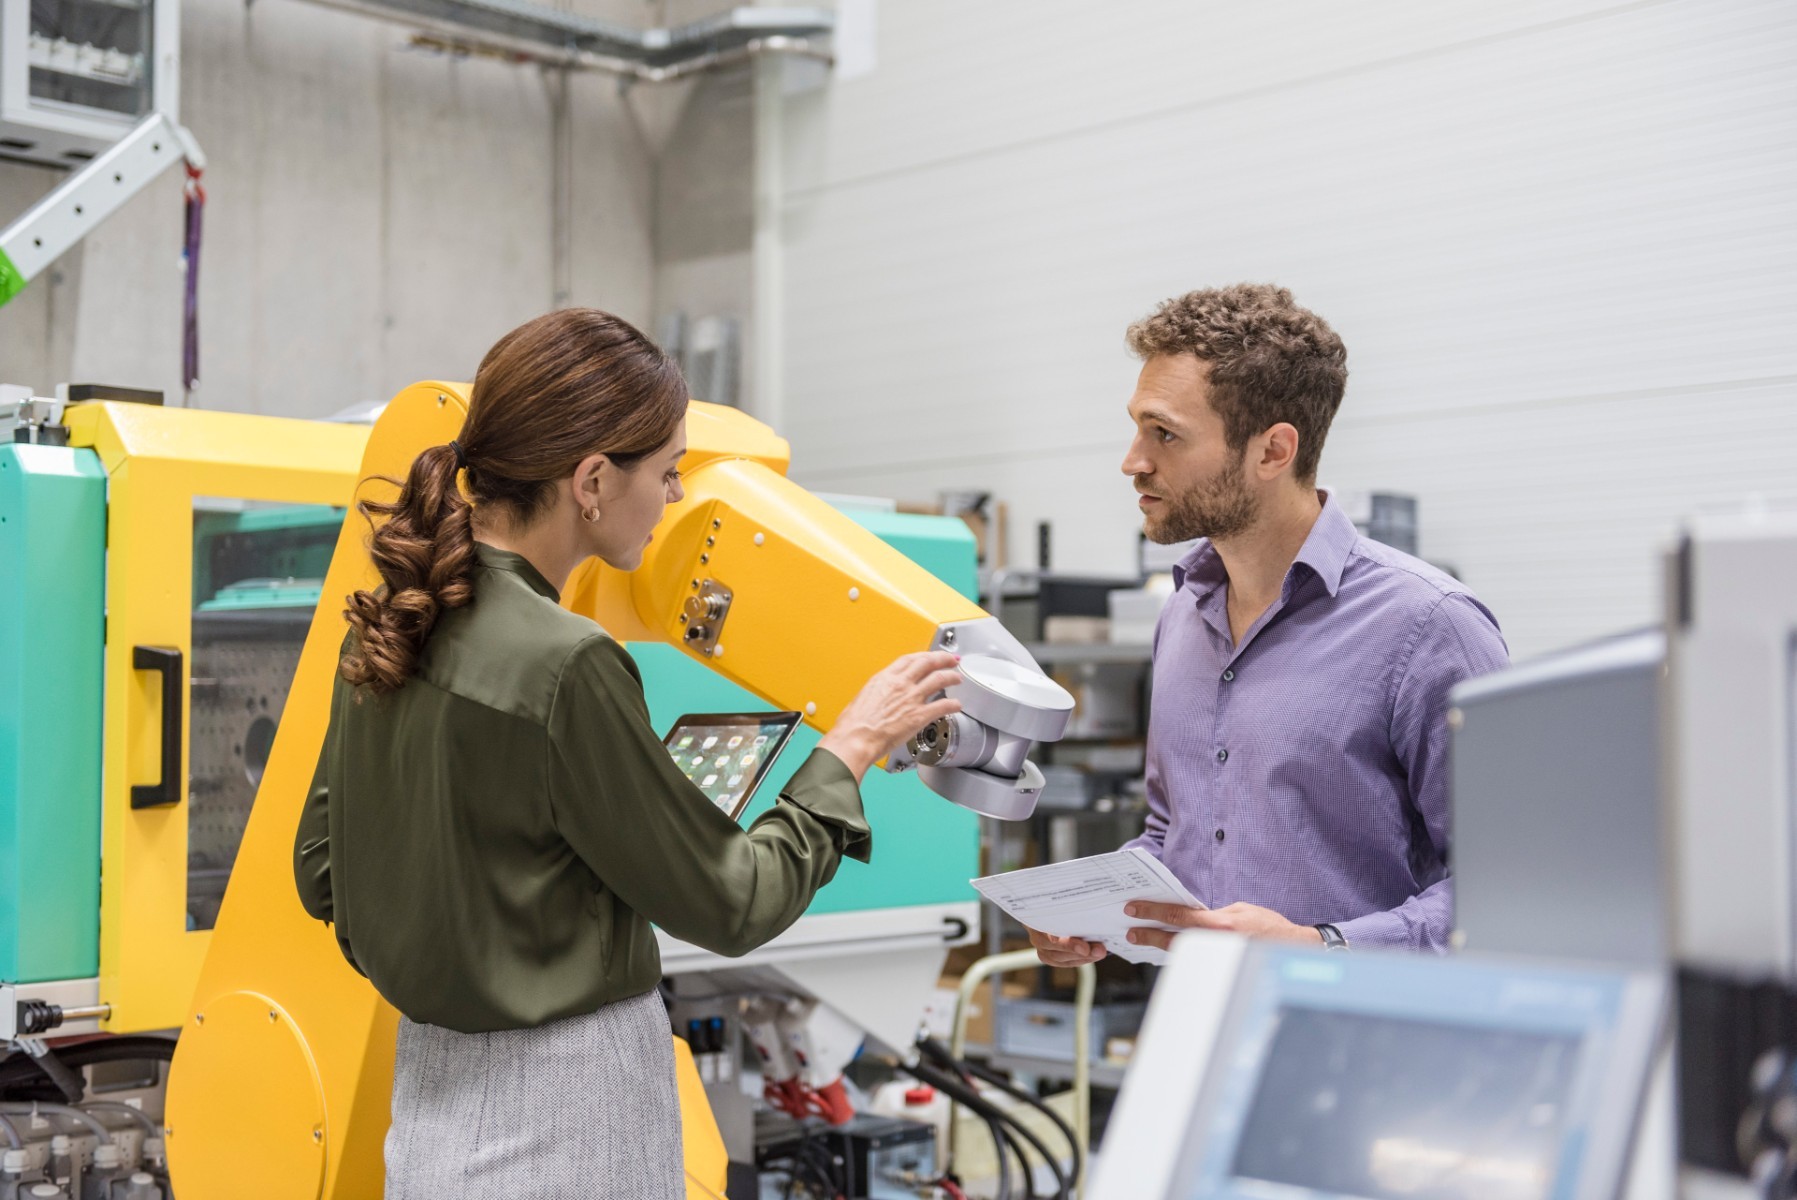 Two professionals meeting in front of industrial equipment